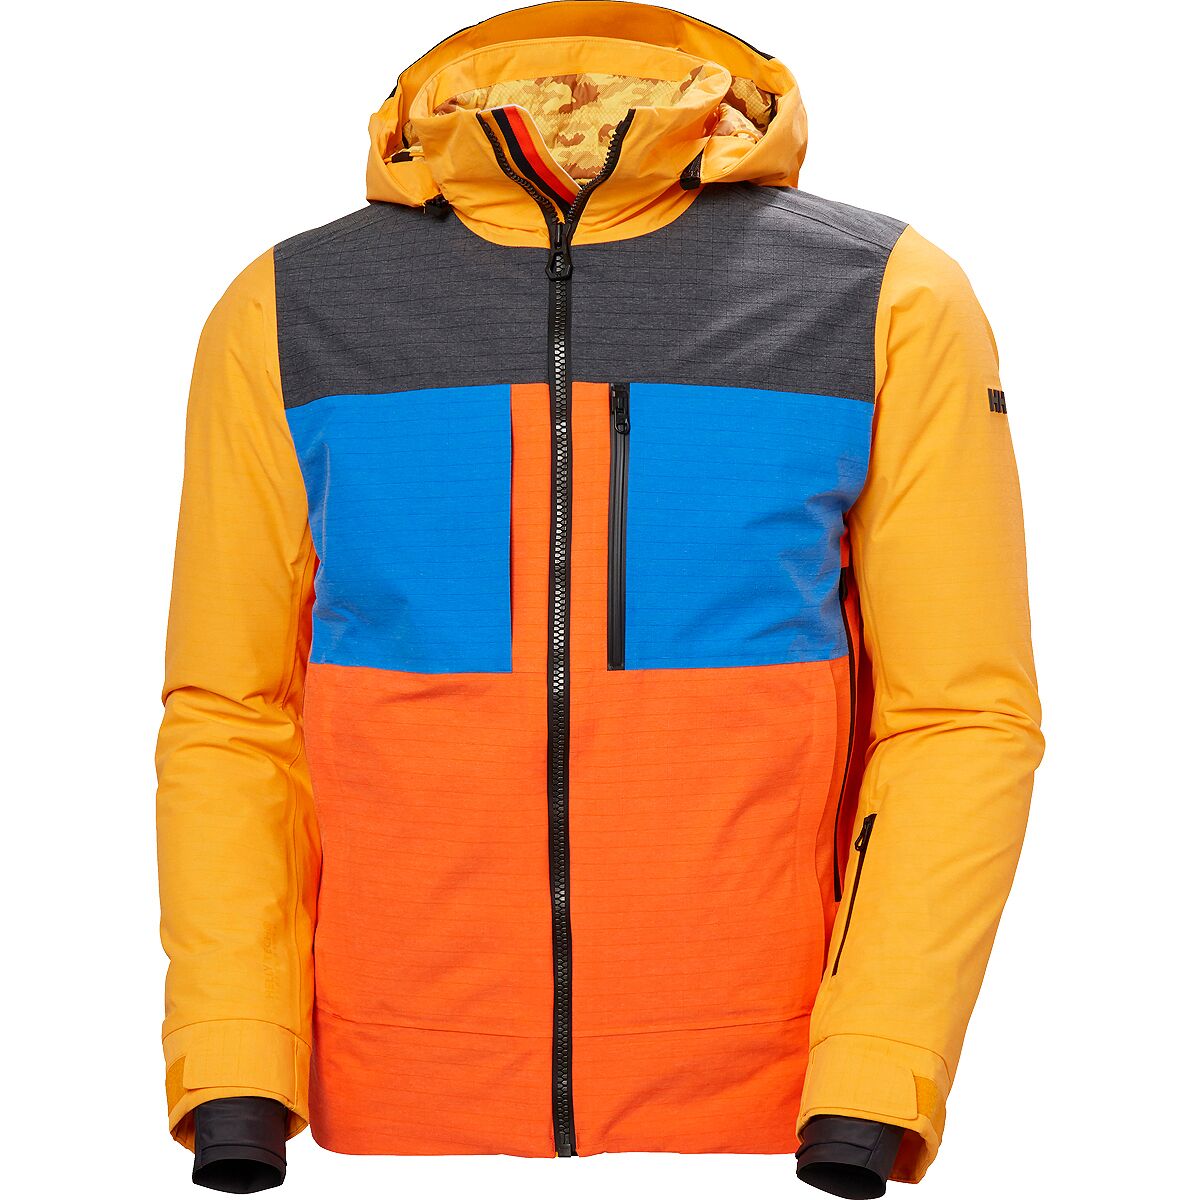 Helly Hansen Tricolore Insulated Jacket - Men's